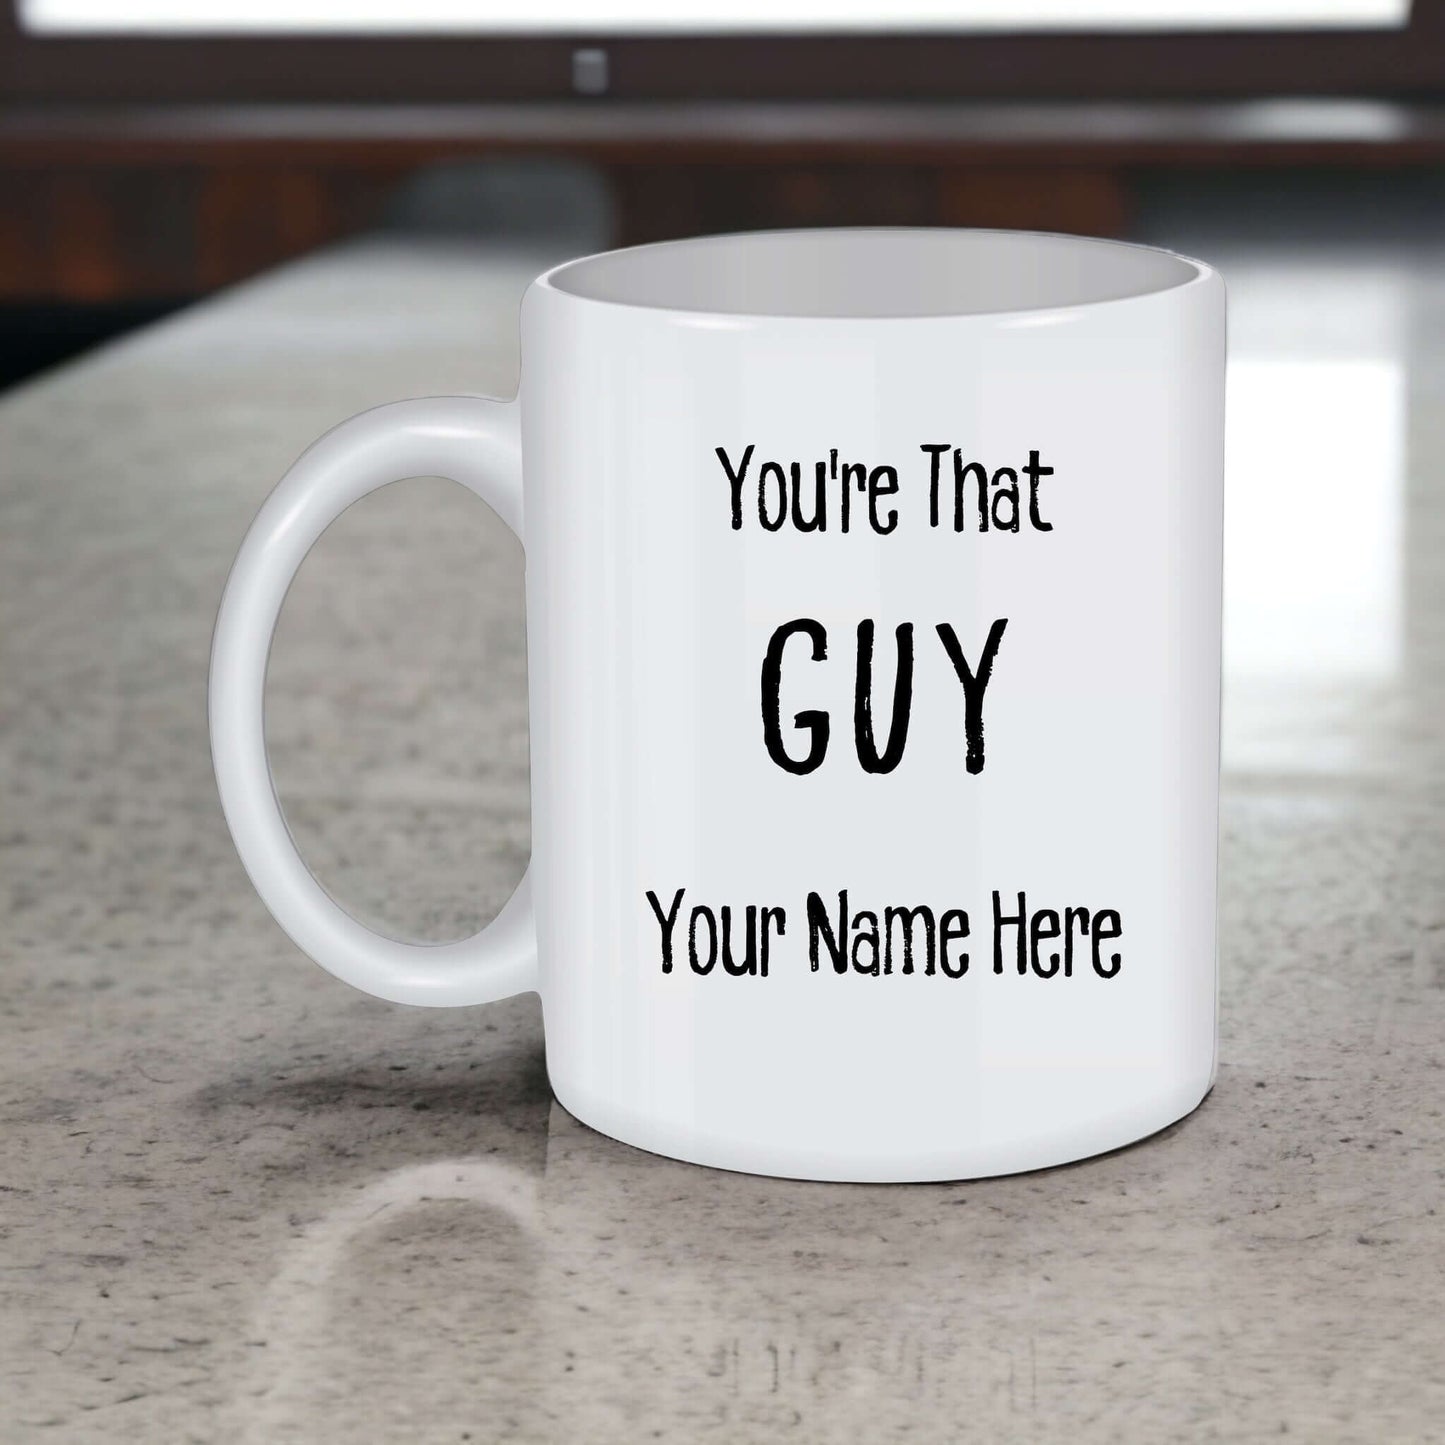 Personalized 'You're That Guy' Inspirational Coffee Mug, Thoughtful Gift for Him, Custom Name, Motivational Saying